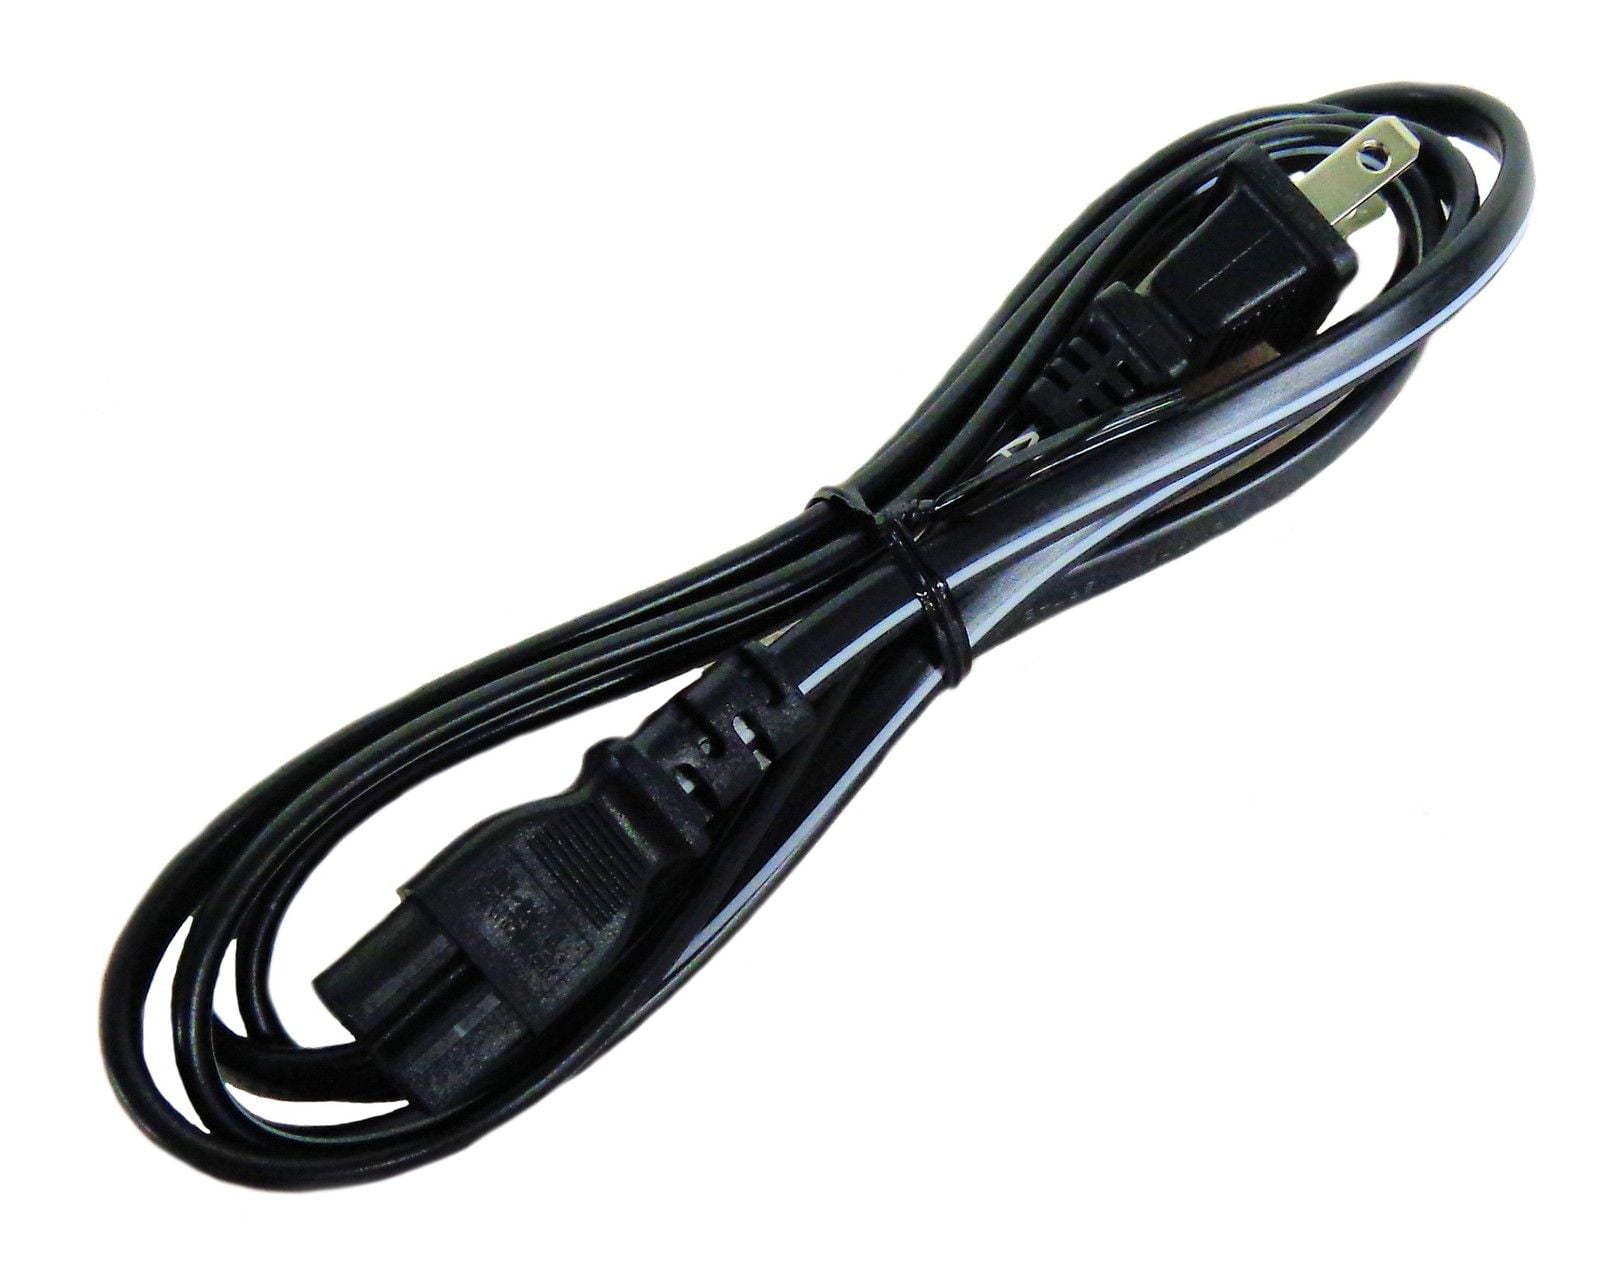 PlatinumPower USB Computer Transfer Data Cable Cord for Brother XR-3140 SE400 Computerized Sewing Machine 